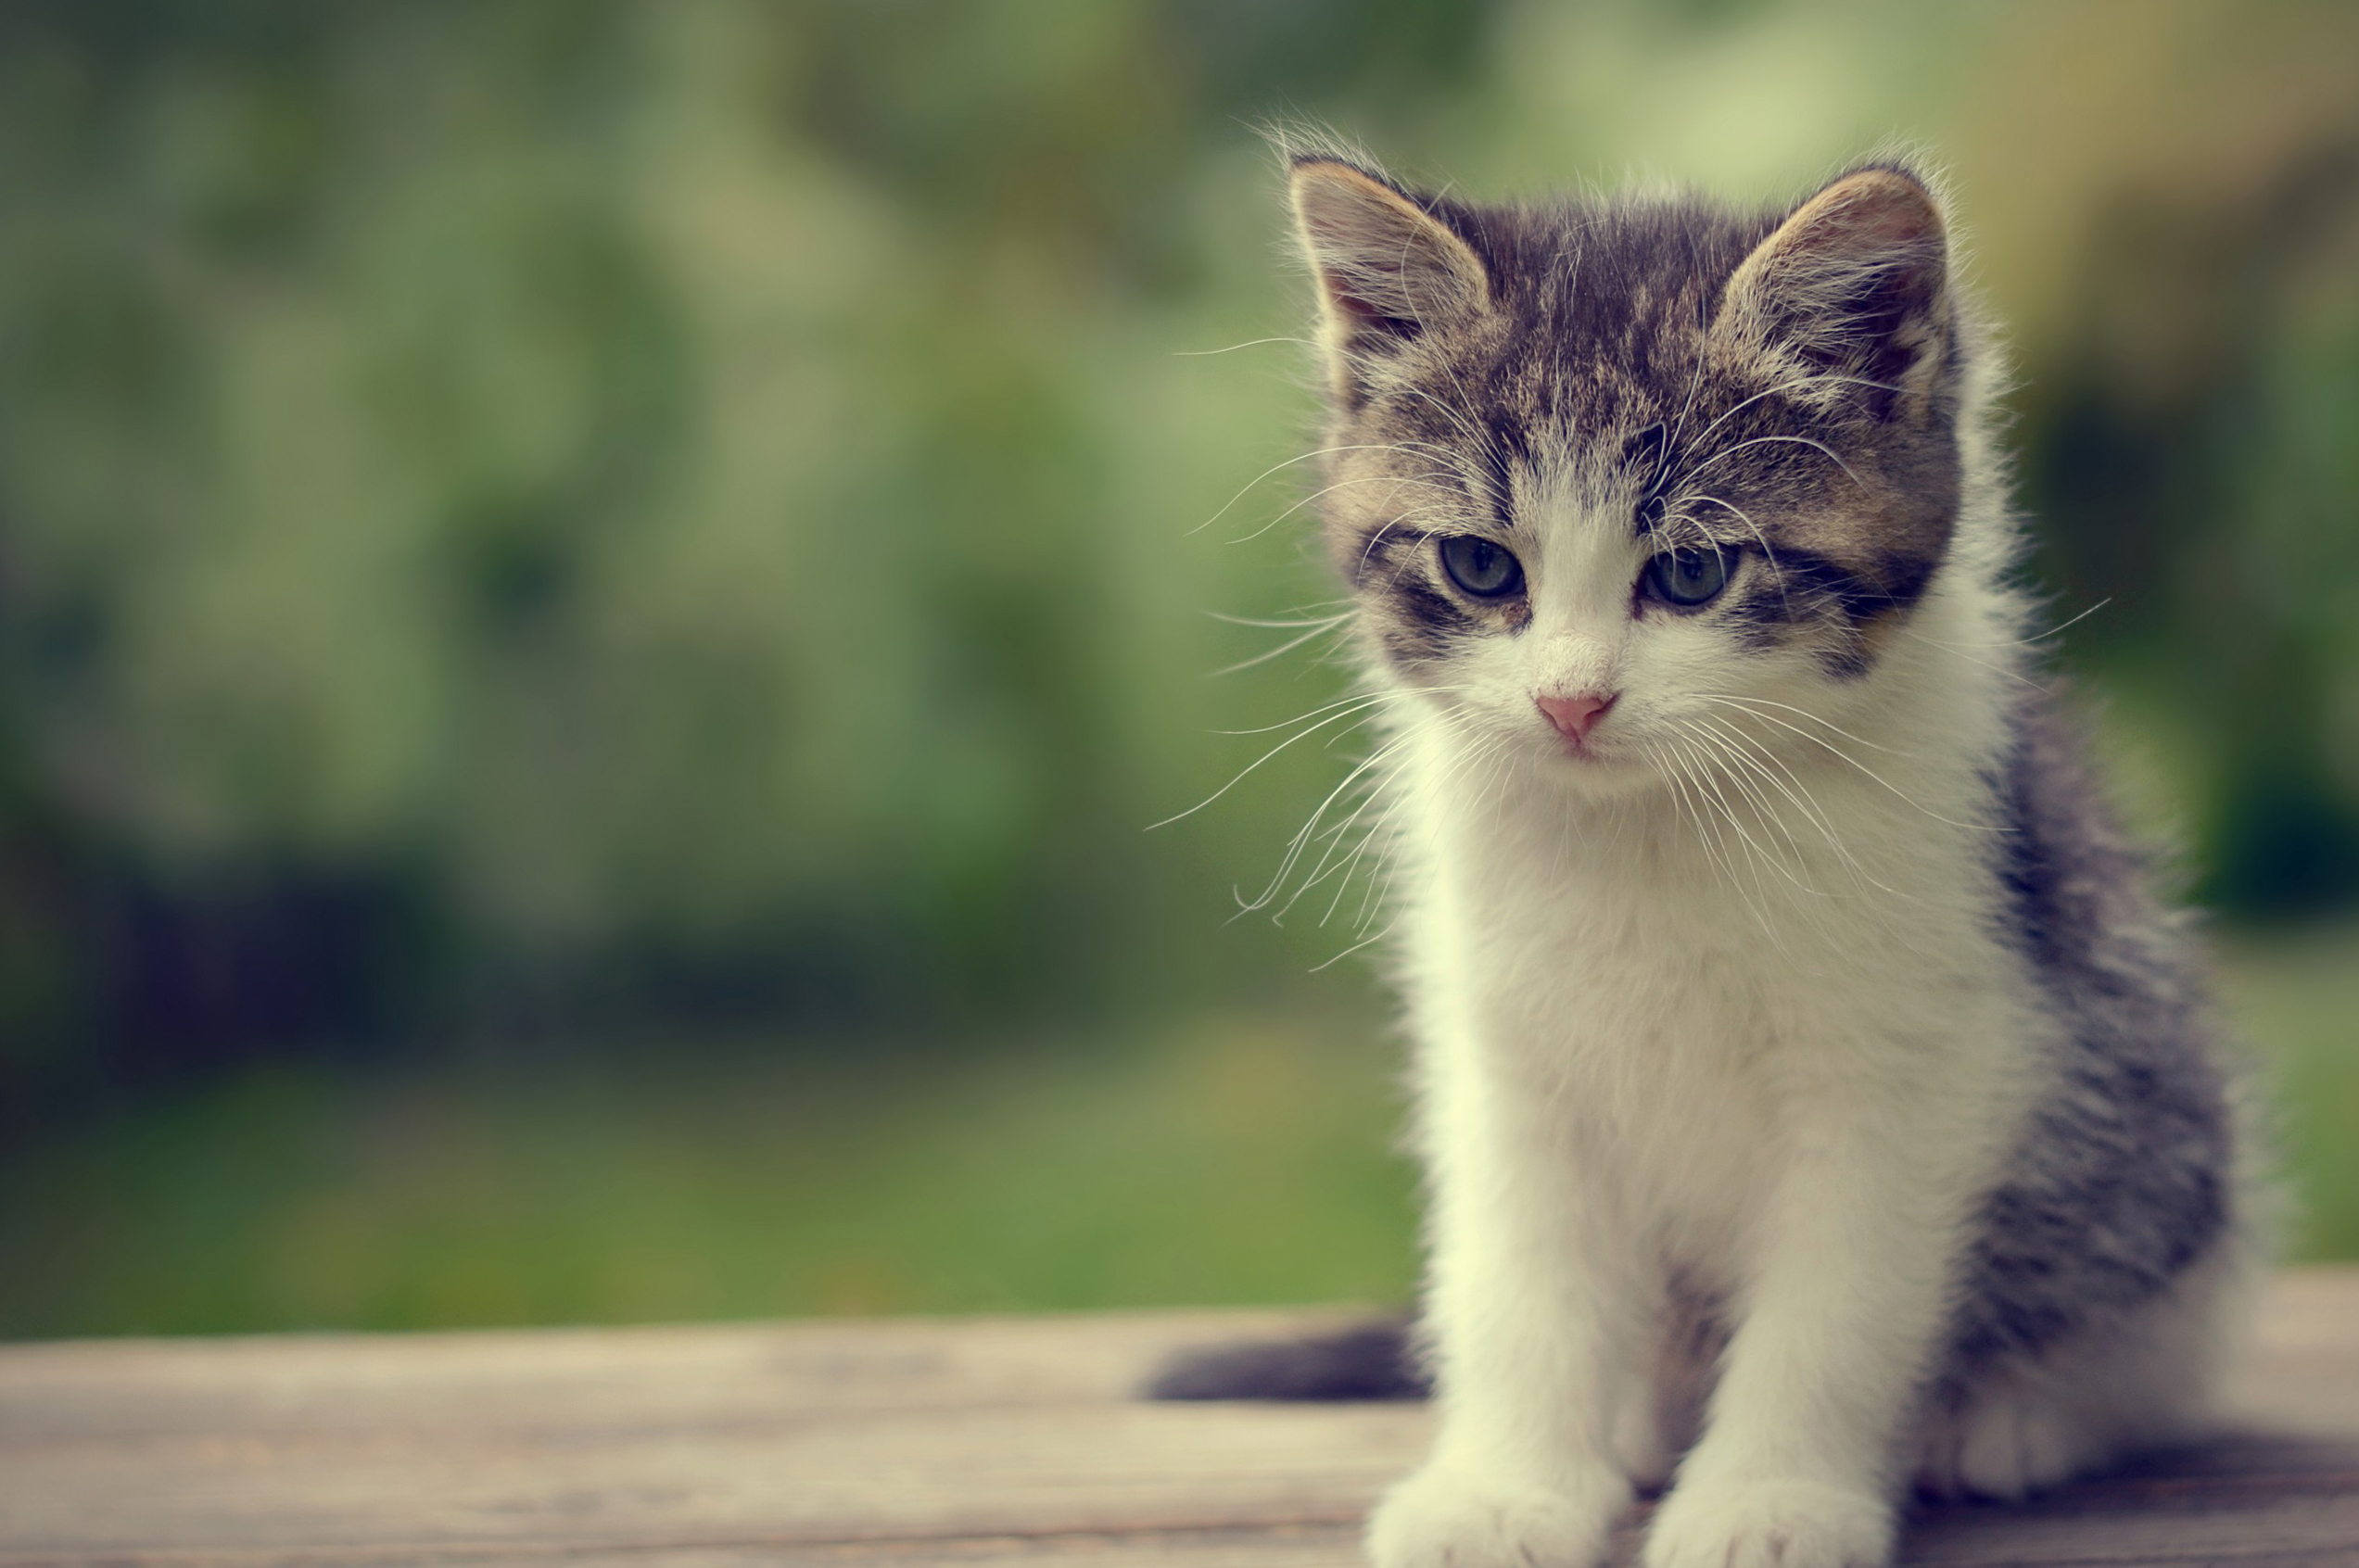 Cute Cat Wallpapers 35 Cute Cat Images and Wallpapers for